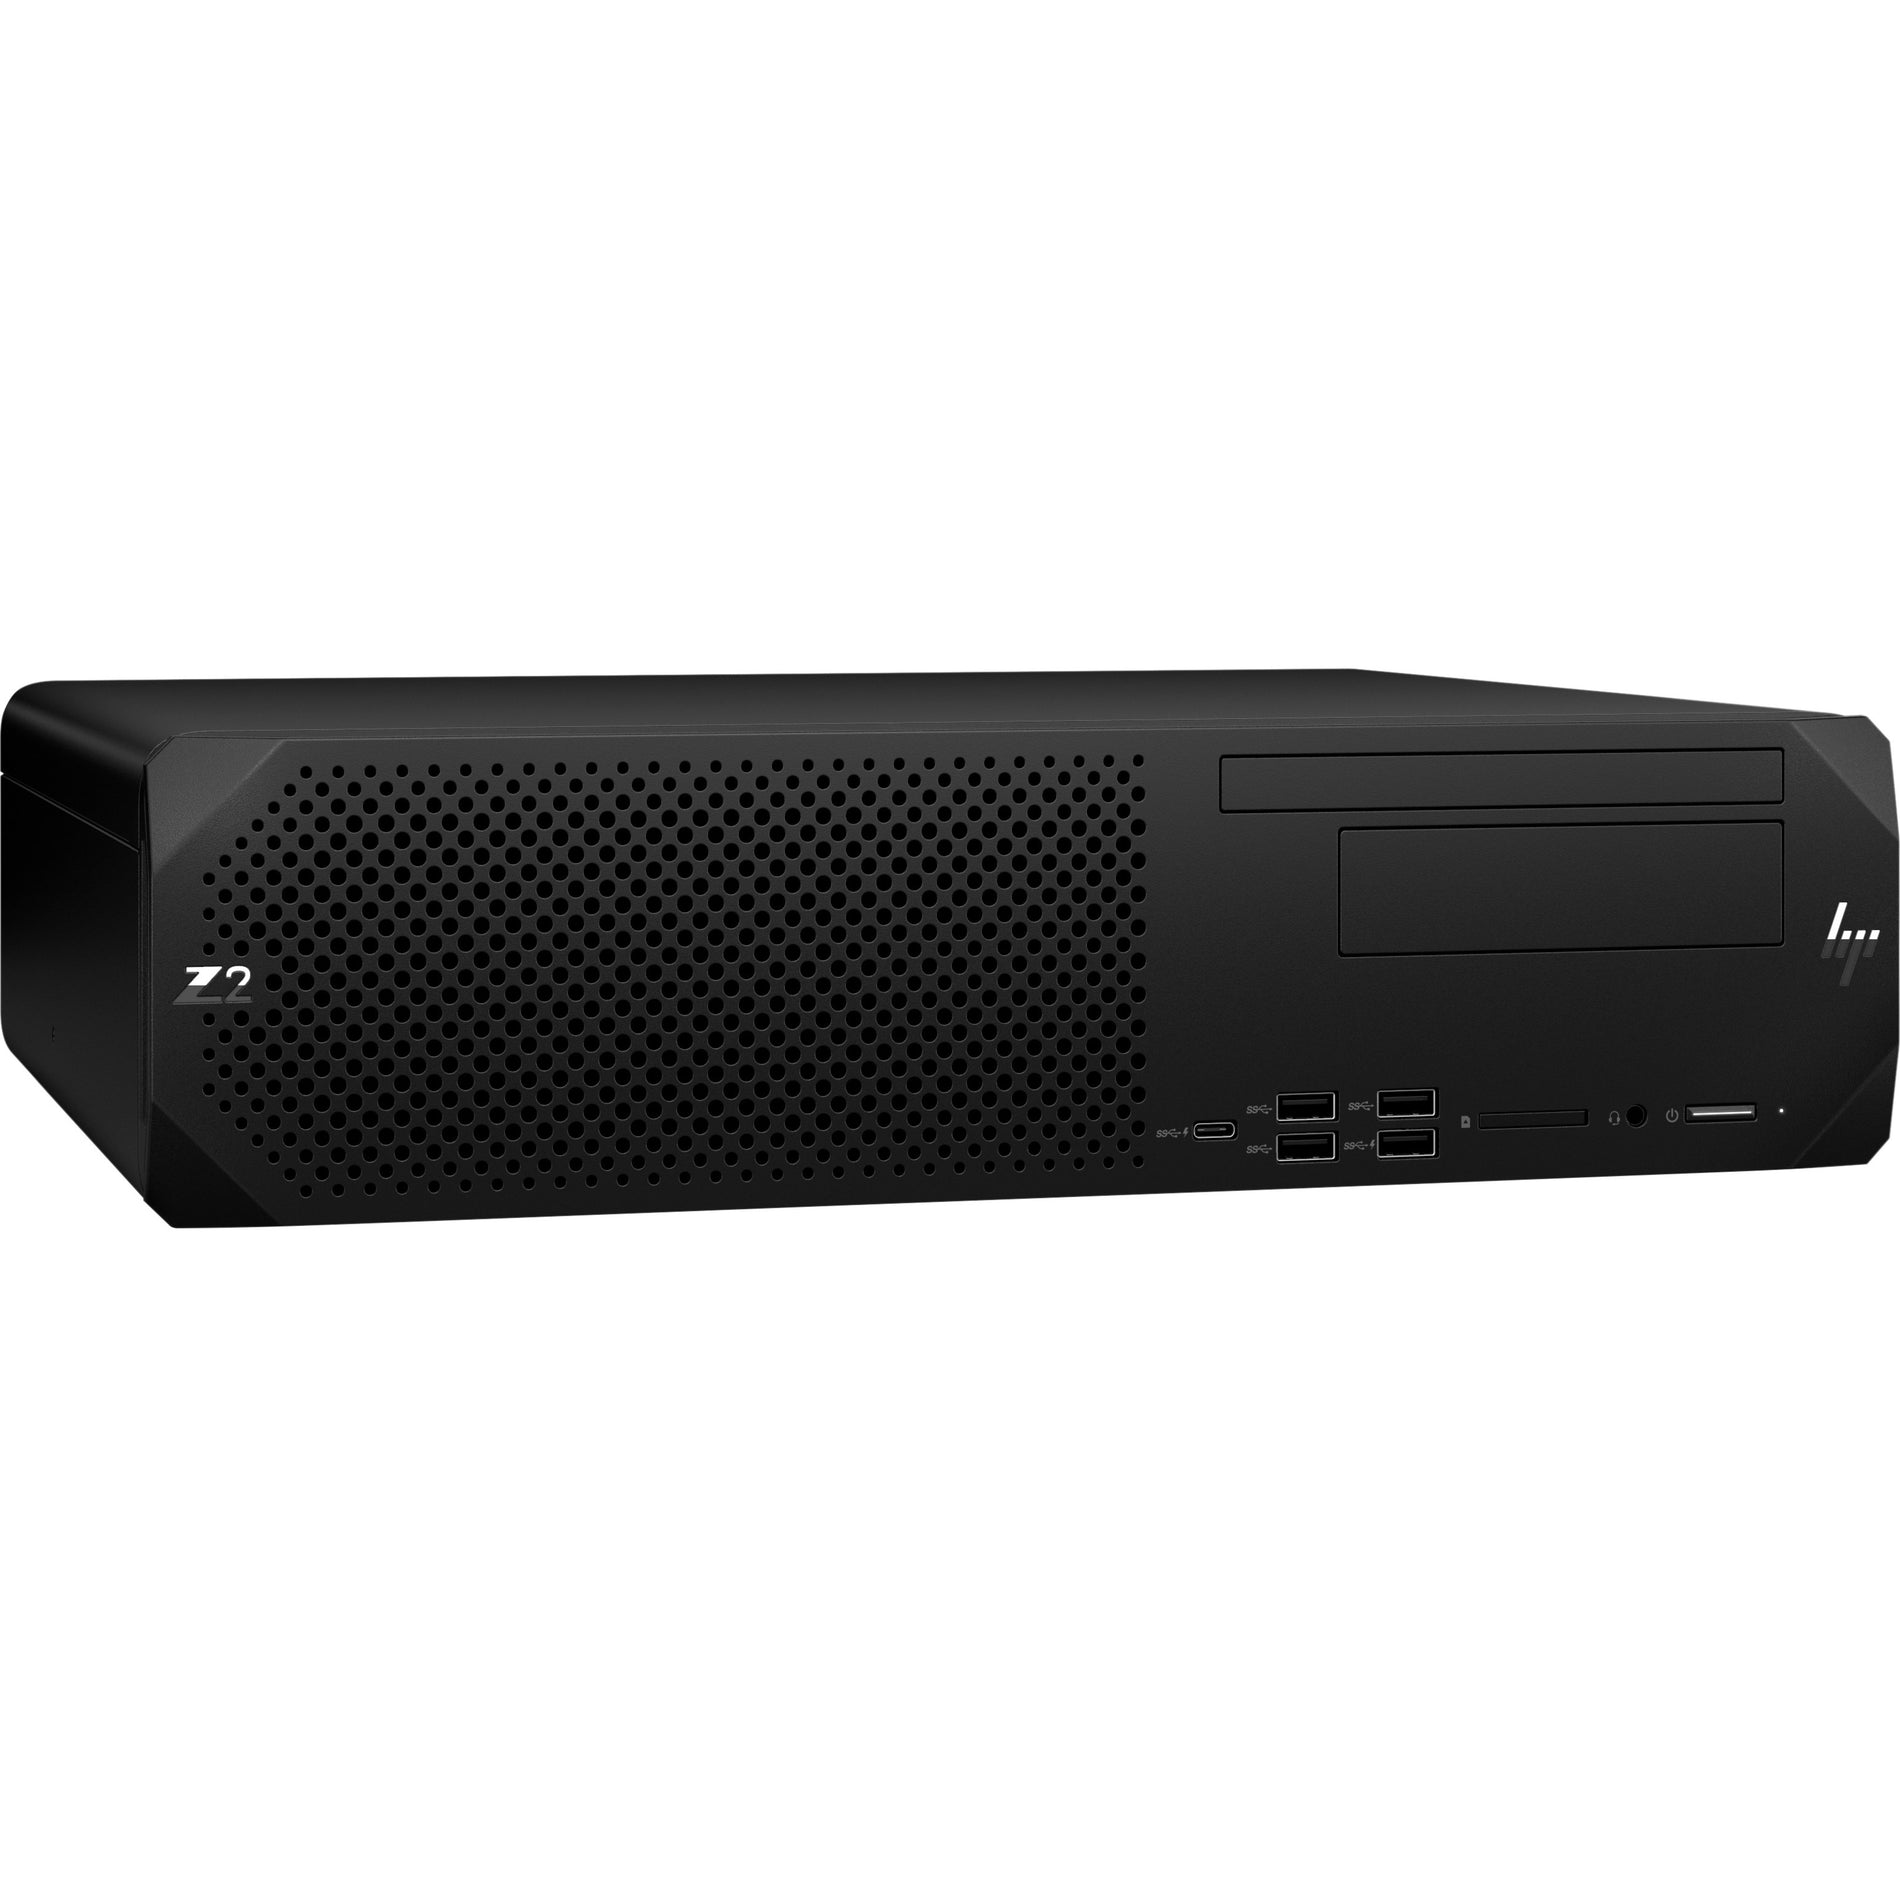 HP Z2 G9 Workstation - Intel Core i7 Dodeca-core - 32GB RAM - 1TB SSD - Small Form Factor [Discontinued]